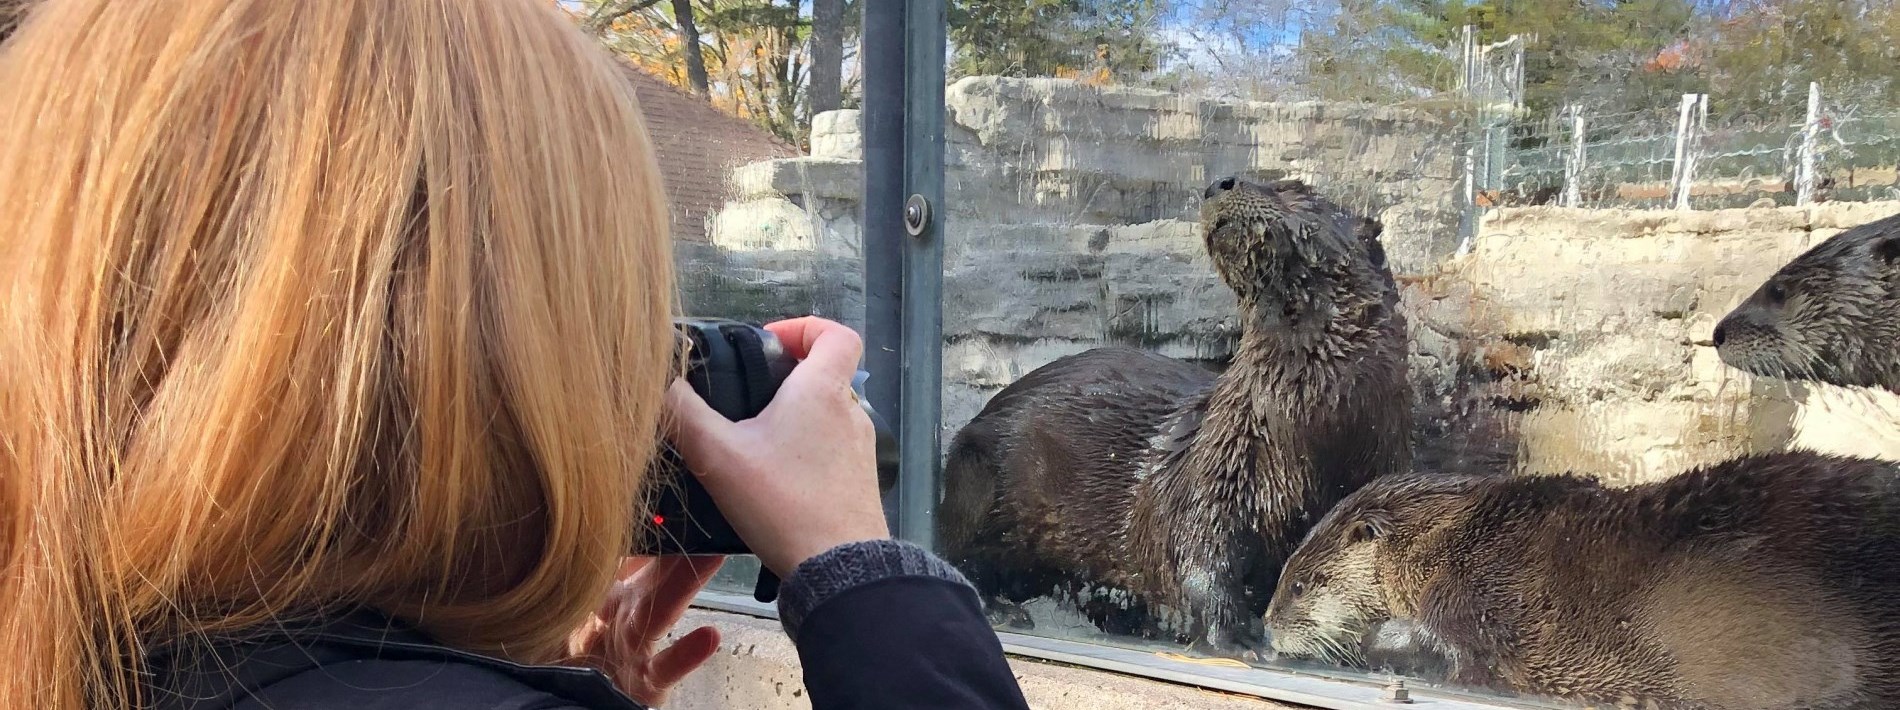 Ash Naylor taking picture of otter